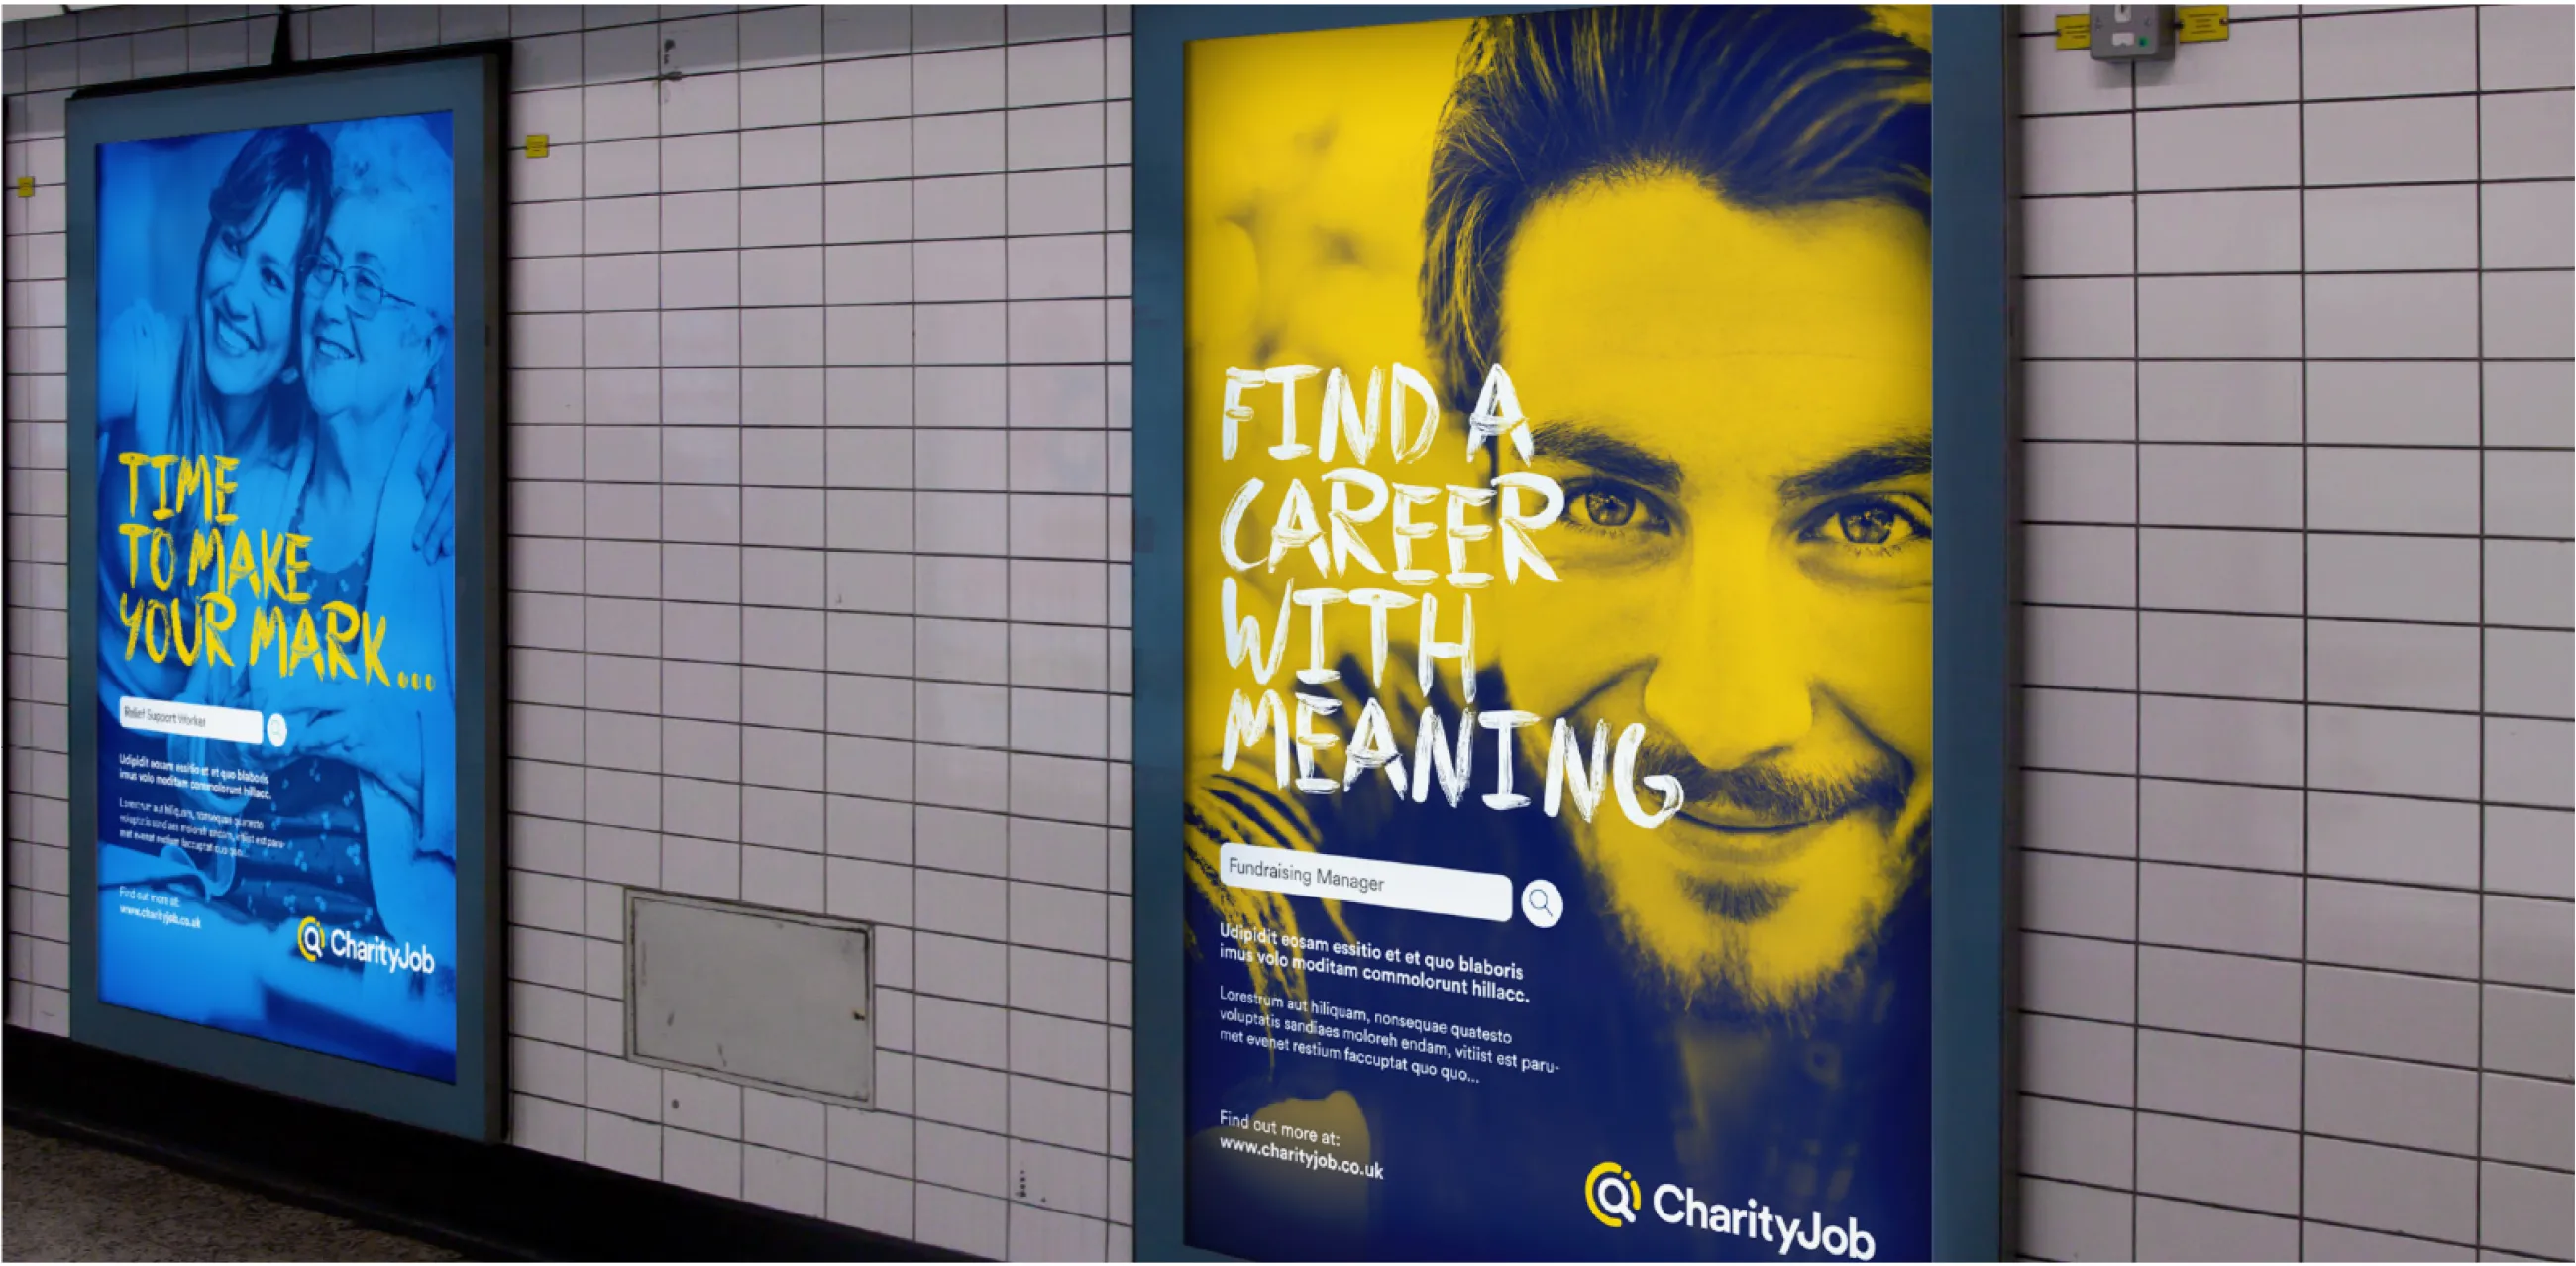 CharityJob posters: "Make your mark" and "Find a career with meaning"